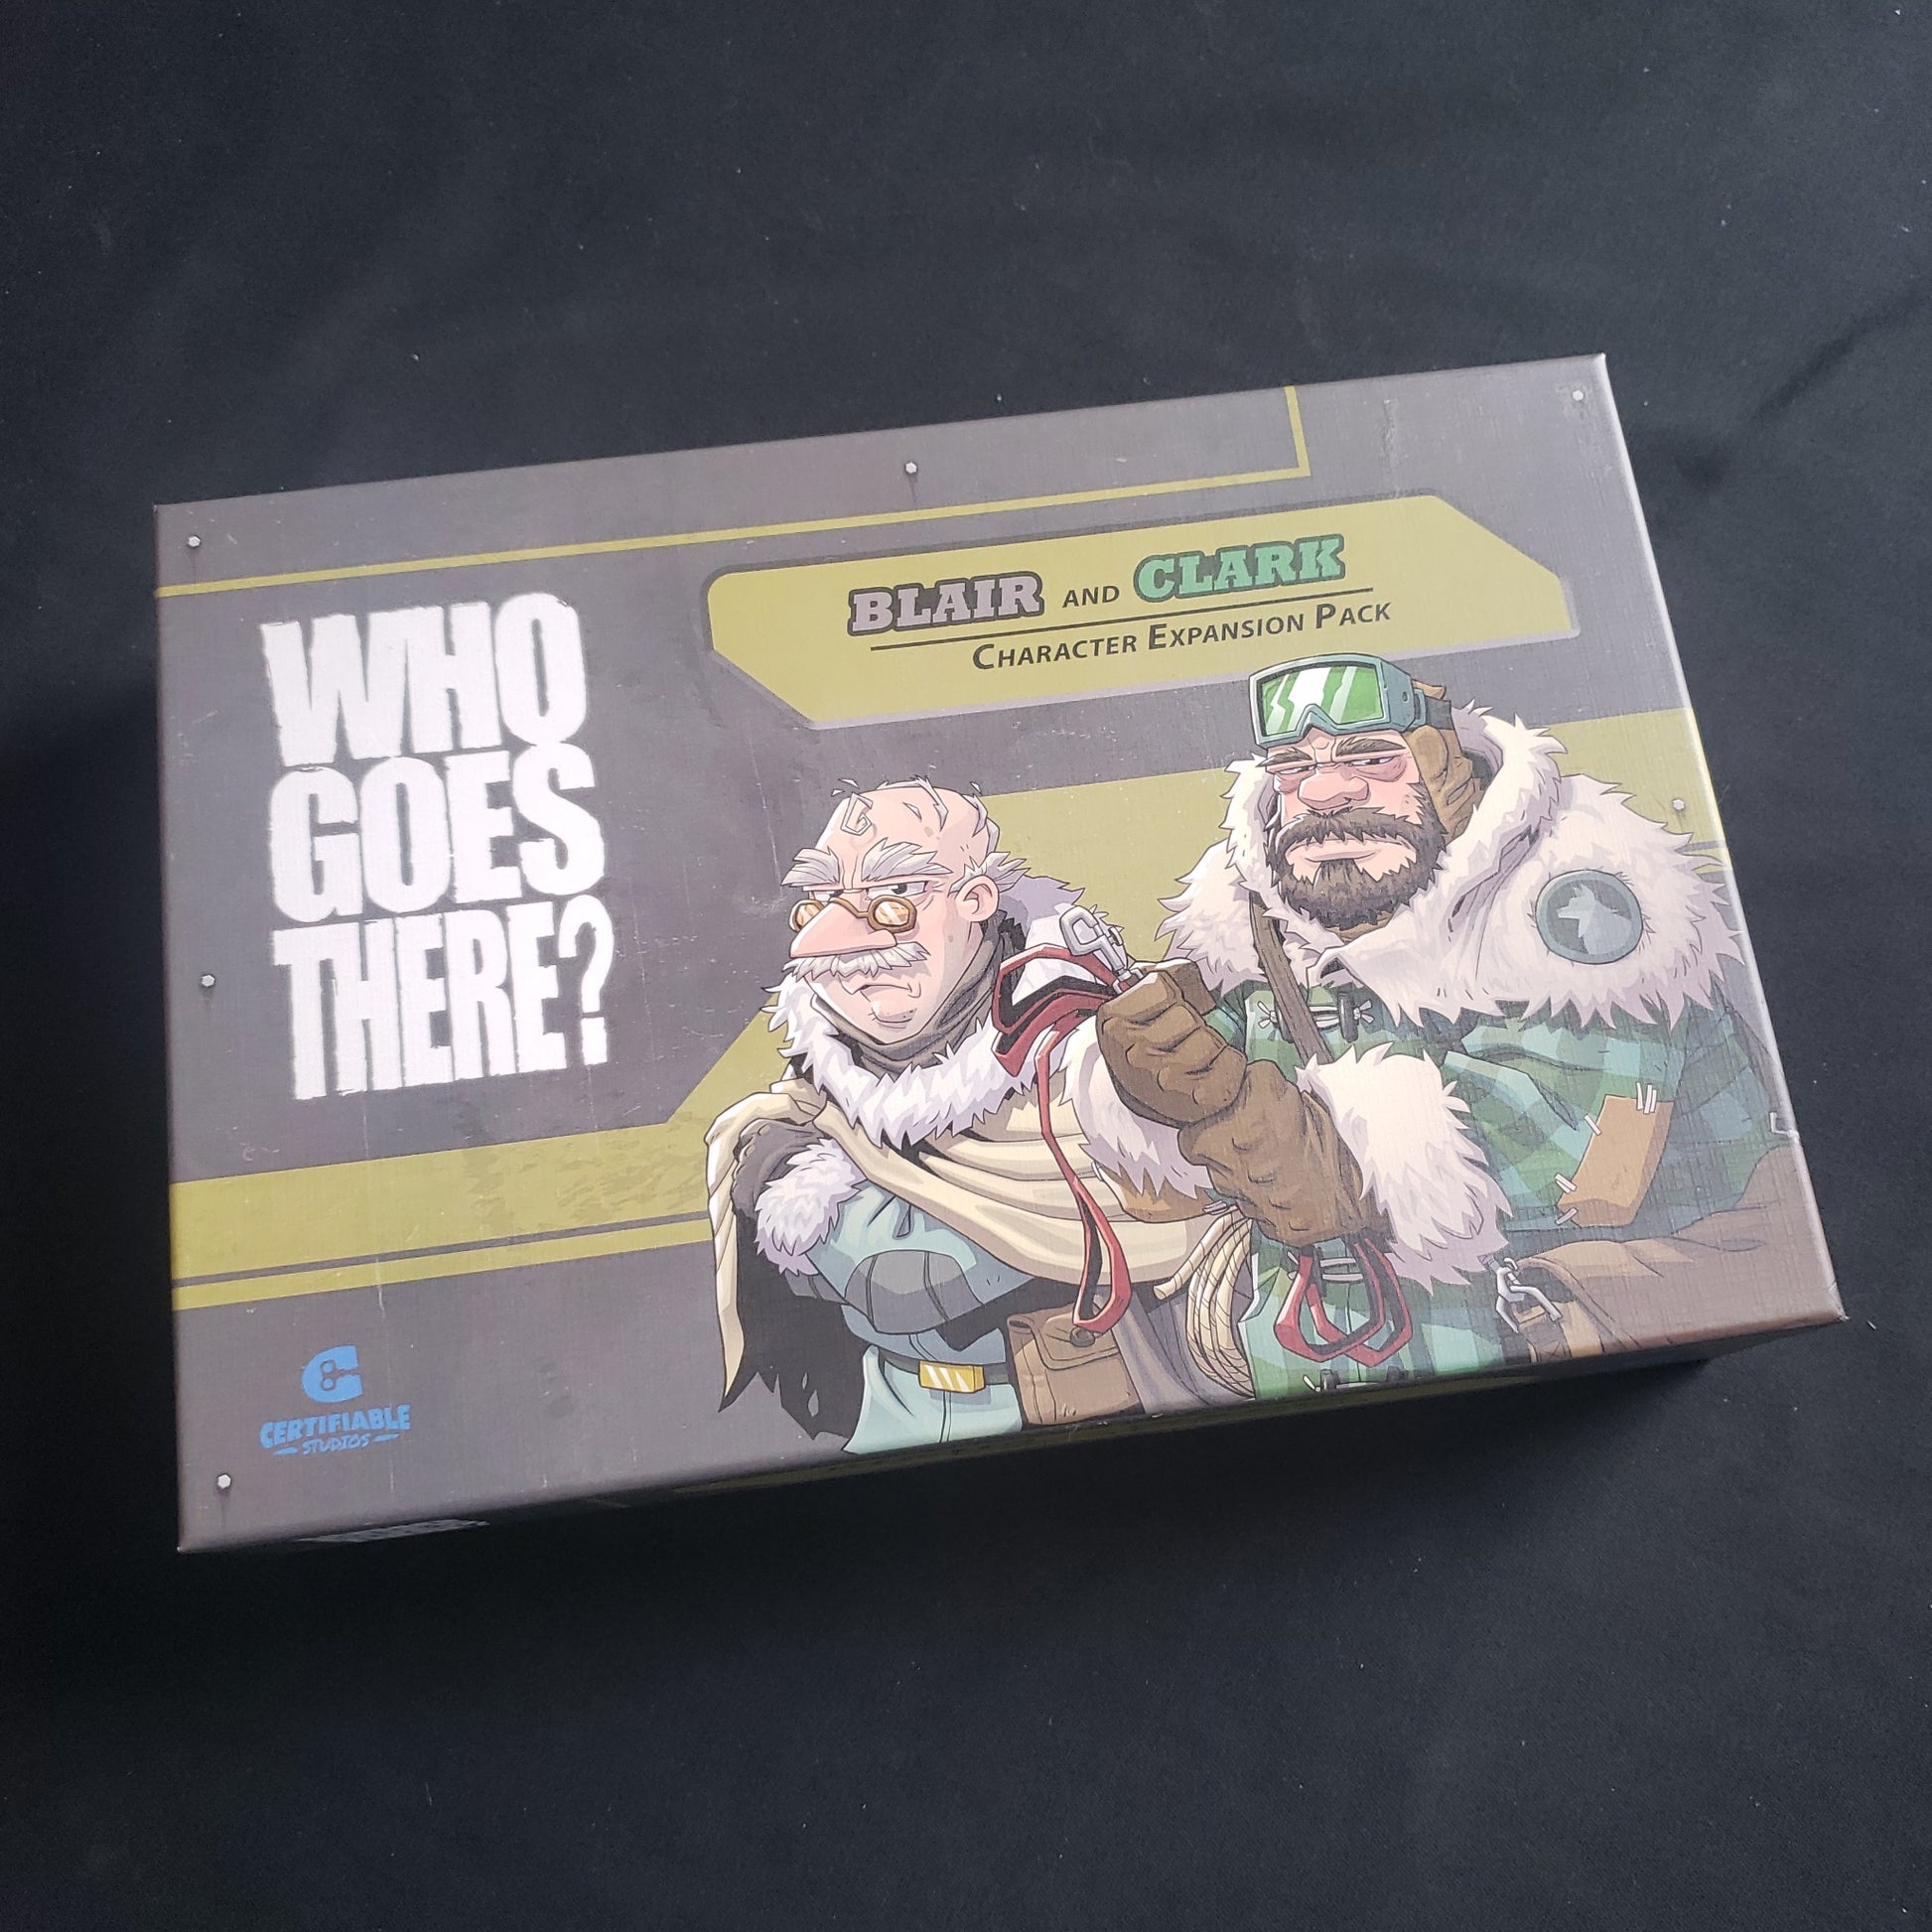 Image shows the front of the box for the Blair and Clark Character Expansion Pack for the Who Goes There board game